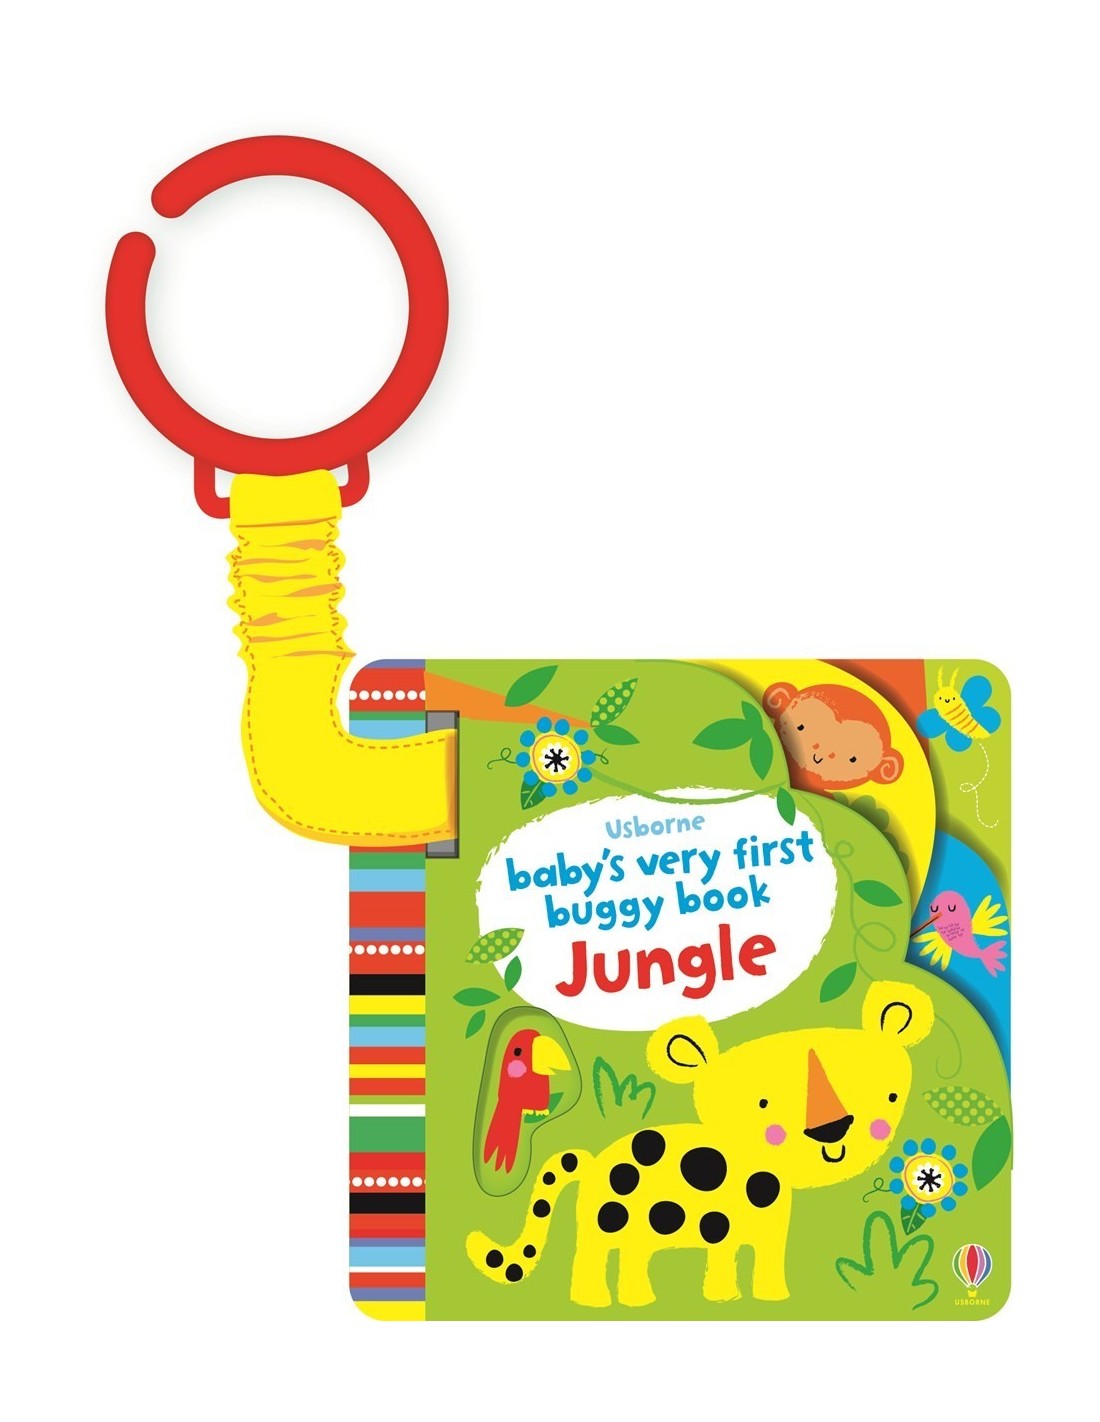 Jungle buggy book